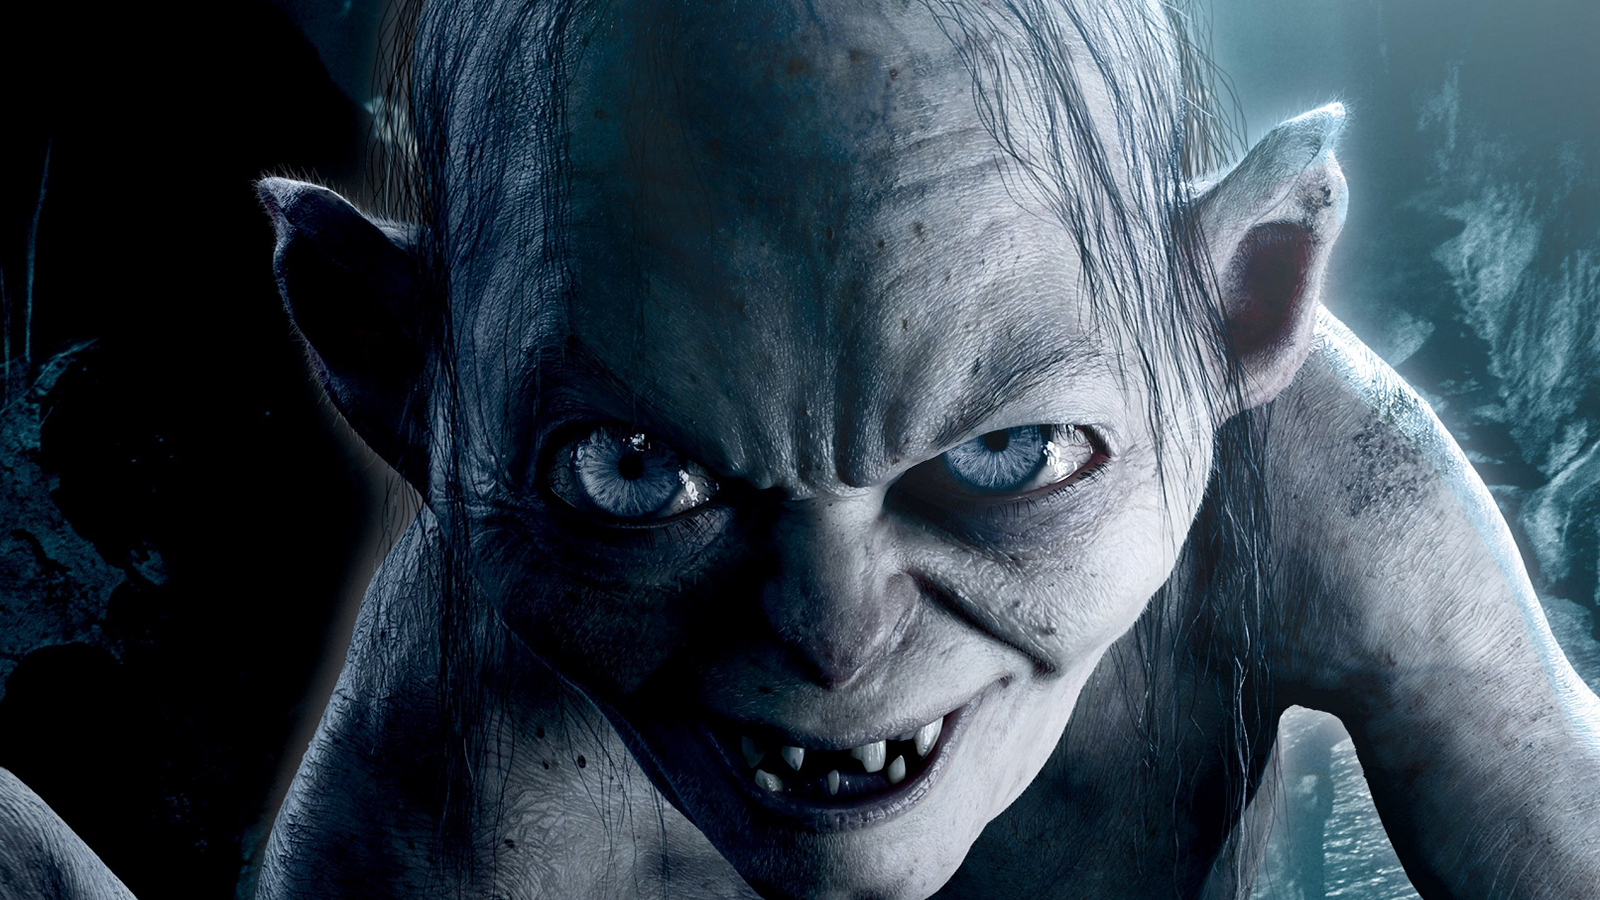 Gollum in a cropped poster for The Hobbit: An Unexpected Journey